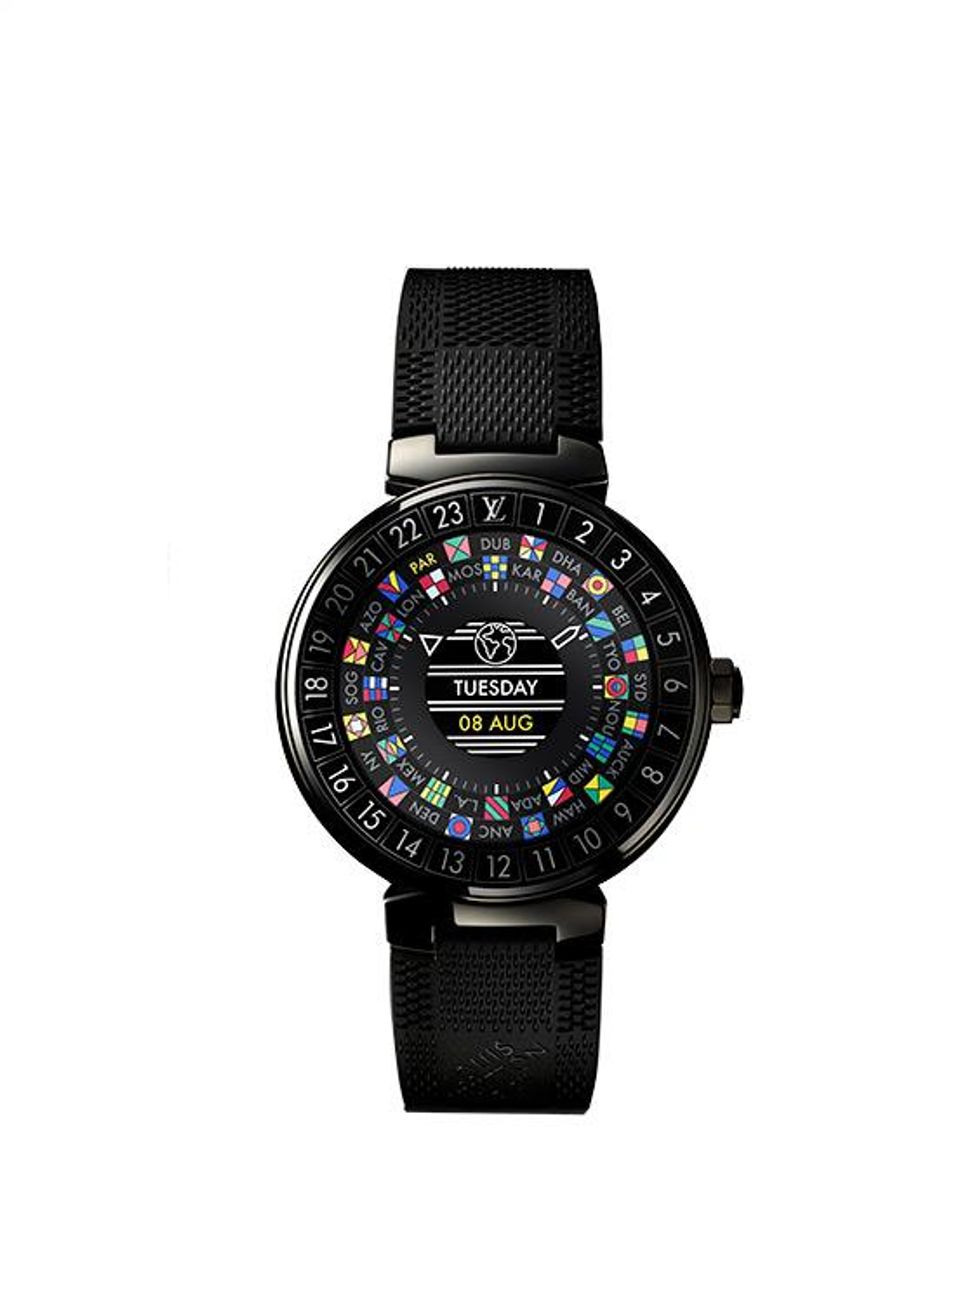 Watch by Louis Vuitton, $2,900.